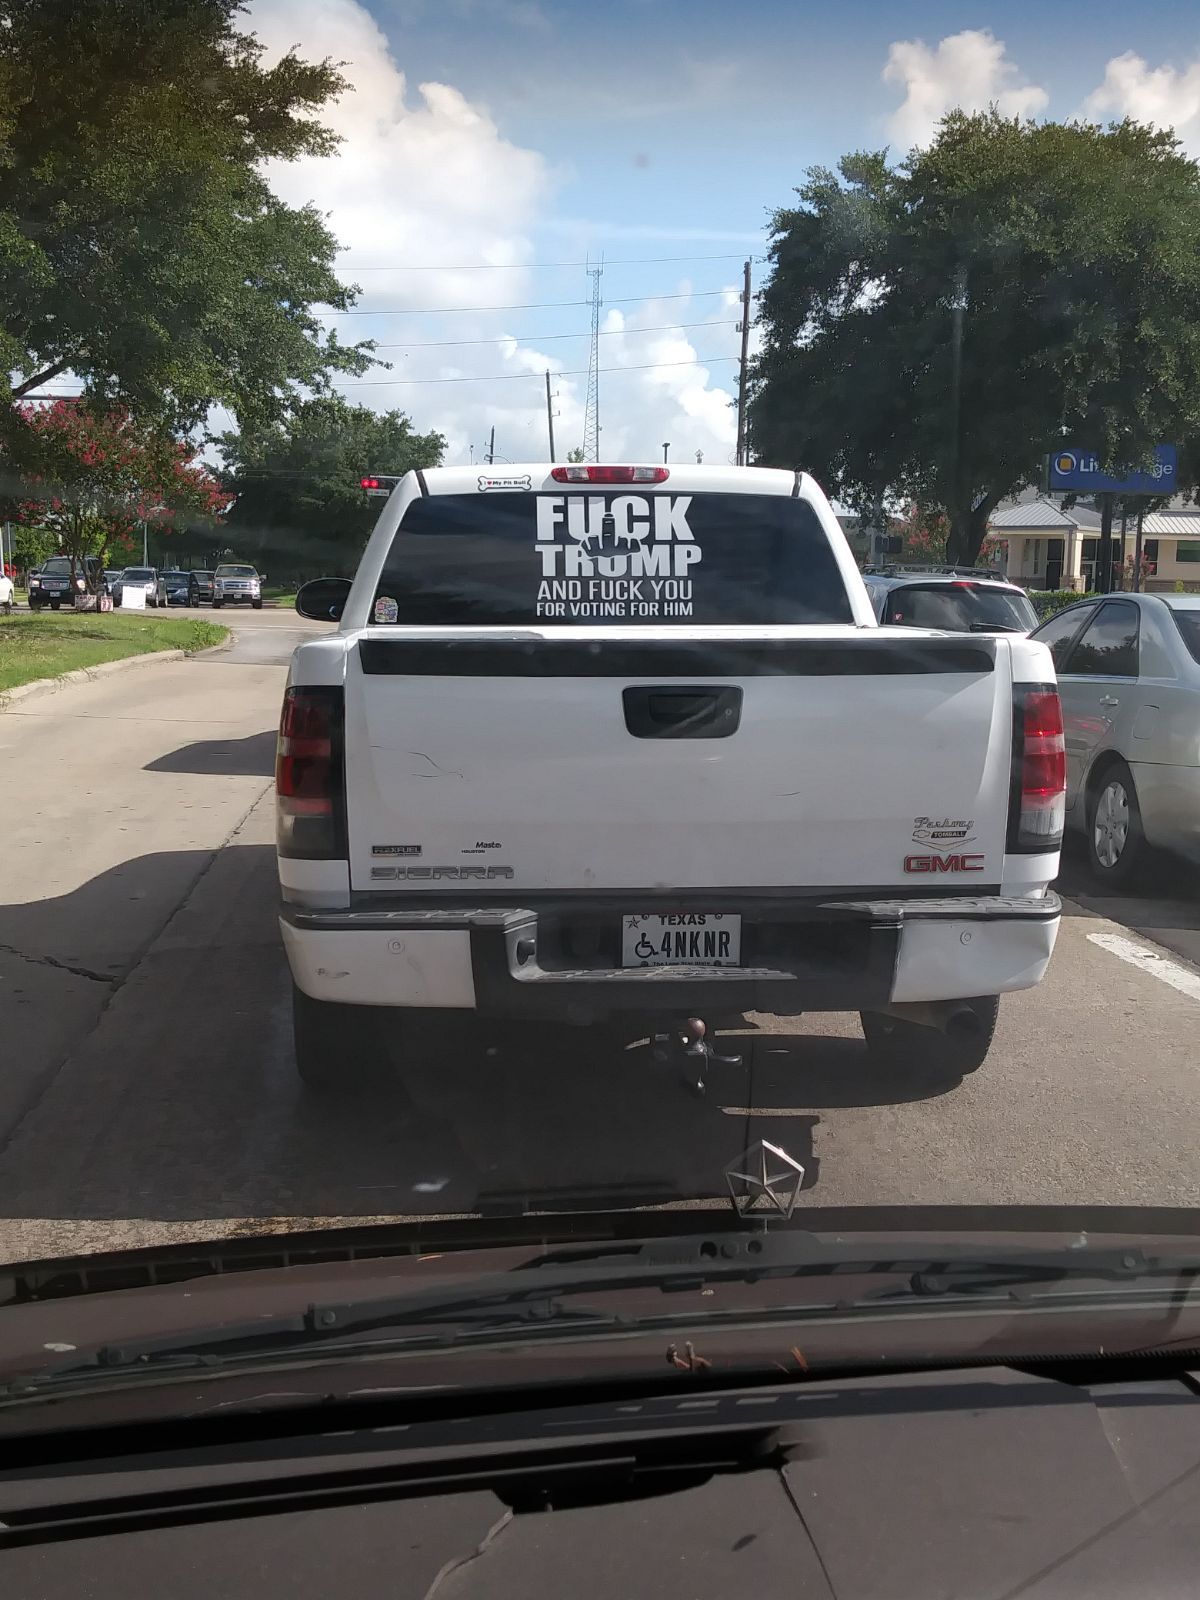 Saw this in Houston